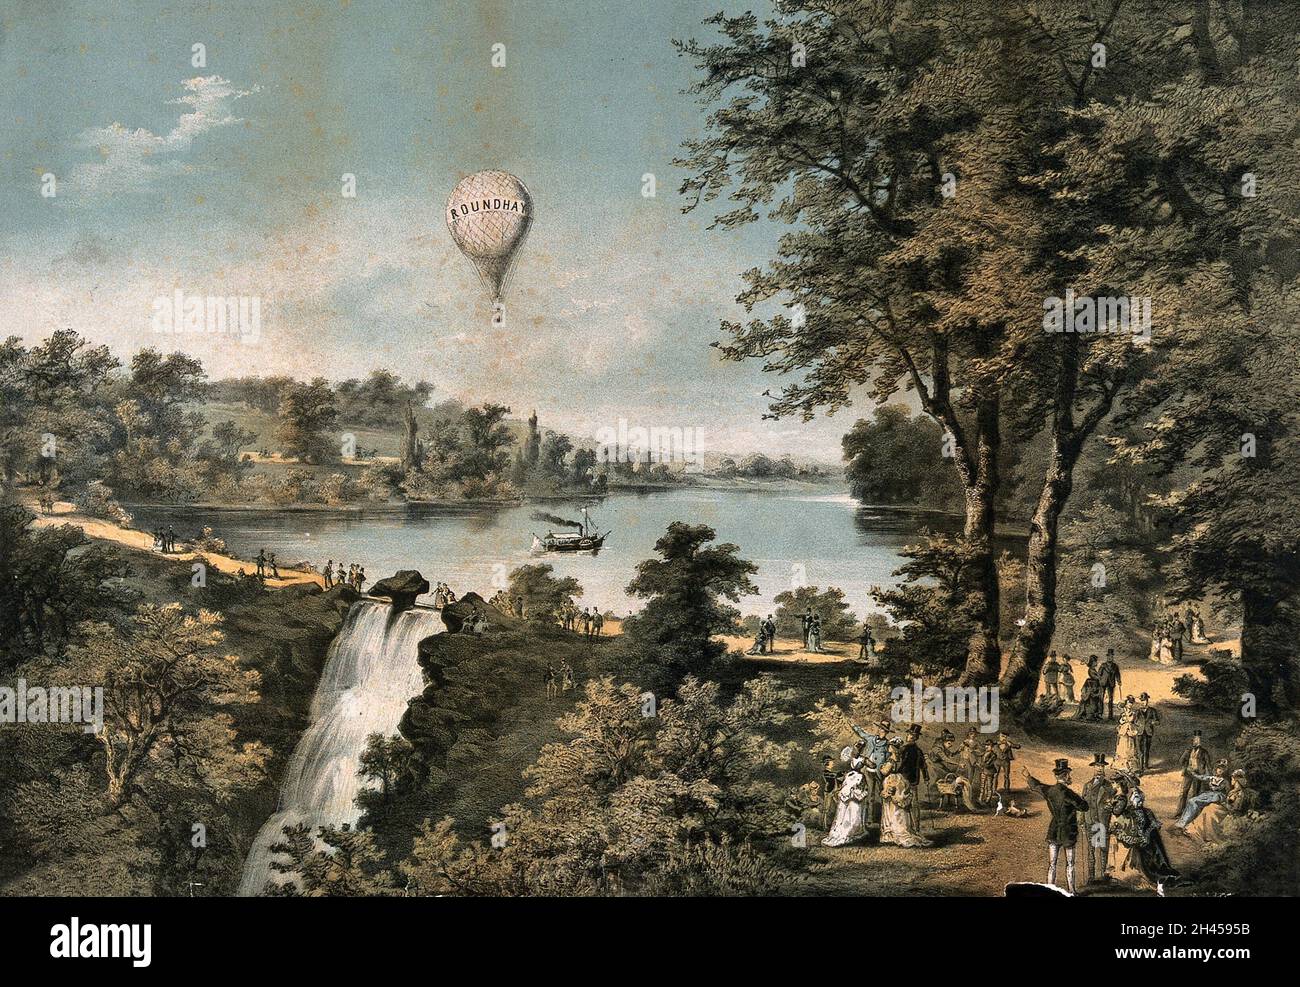 Roundhay Park, Leeds: the balloon 'Roundhay' flies above the park; a paddle-steamer takes passengers across the lake; in the foreground, a cascade. Coloured lithograph. Stock Photo